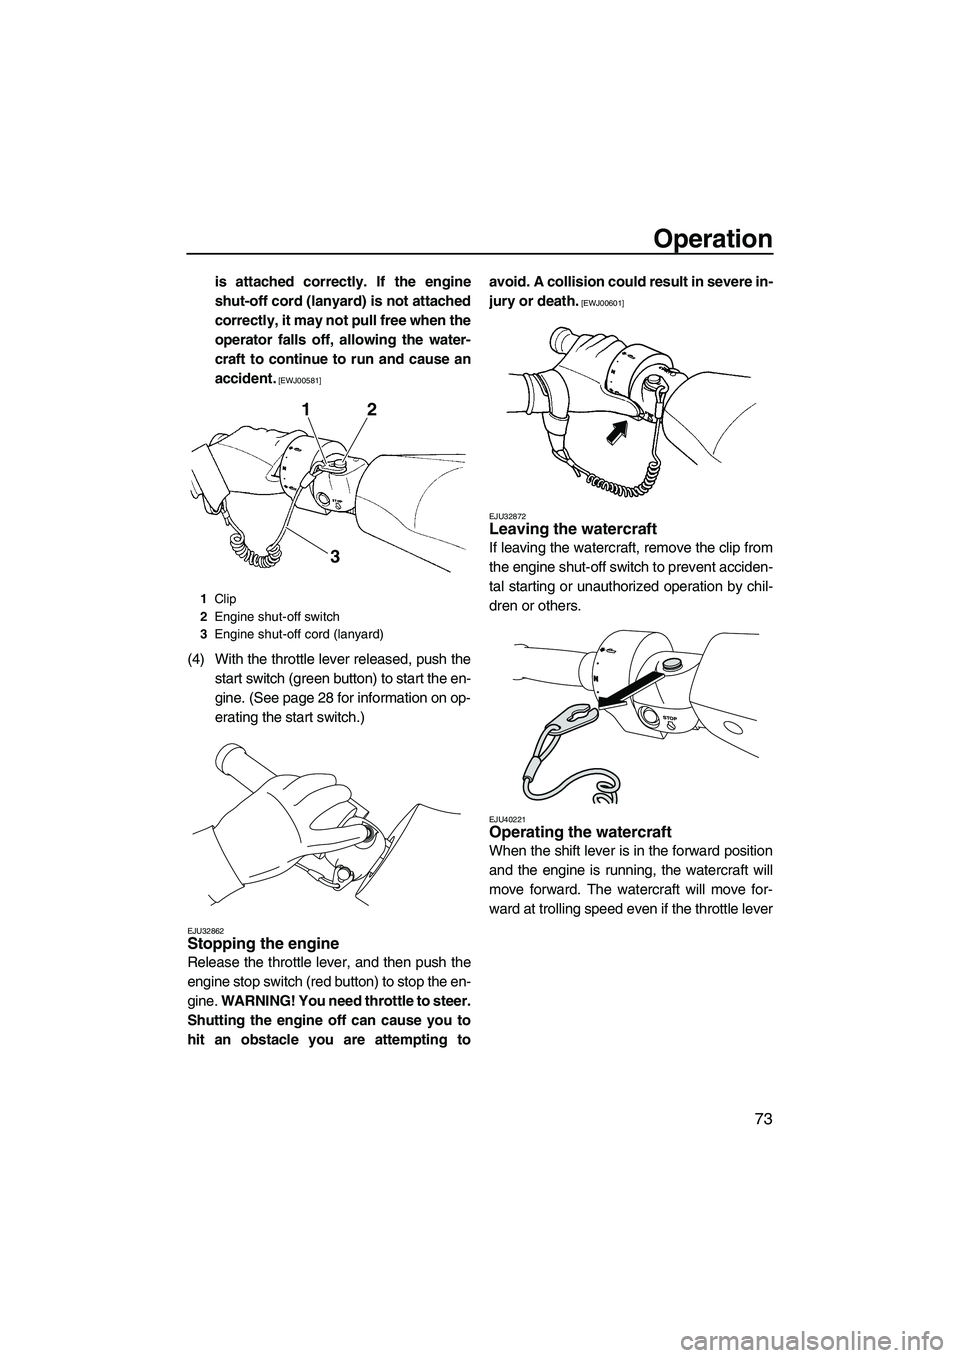 YAMAHA FX SHO 2011  Owners Manual Operation
73
is attached correctly. If the engine
shut-off cord (lanyard) is not attached
correctly, it may not pull free when the
operator falls off, allowing the water-
craft to continue to run and 